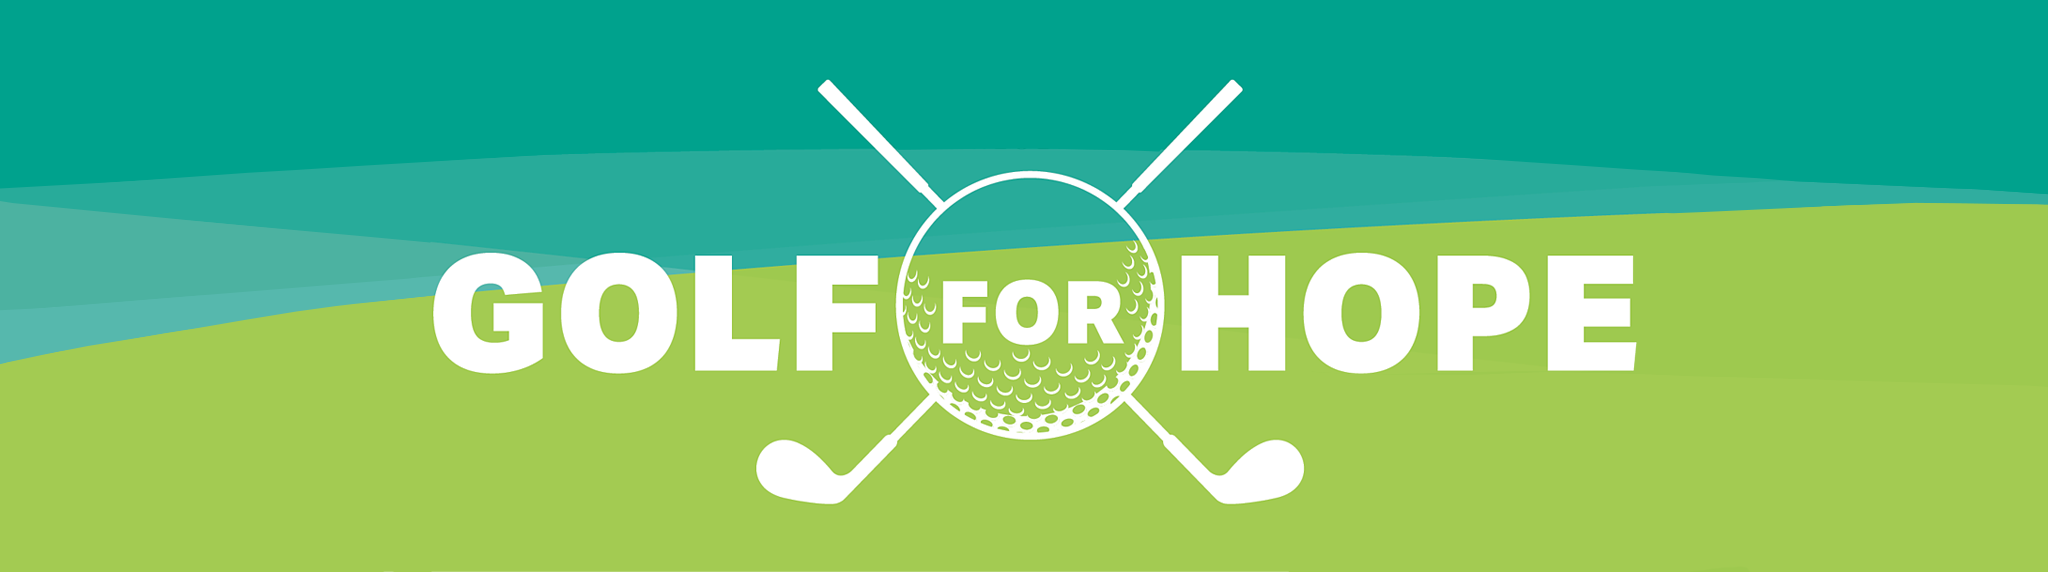 Golf for Hope event Banner